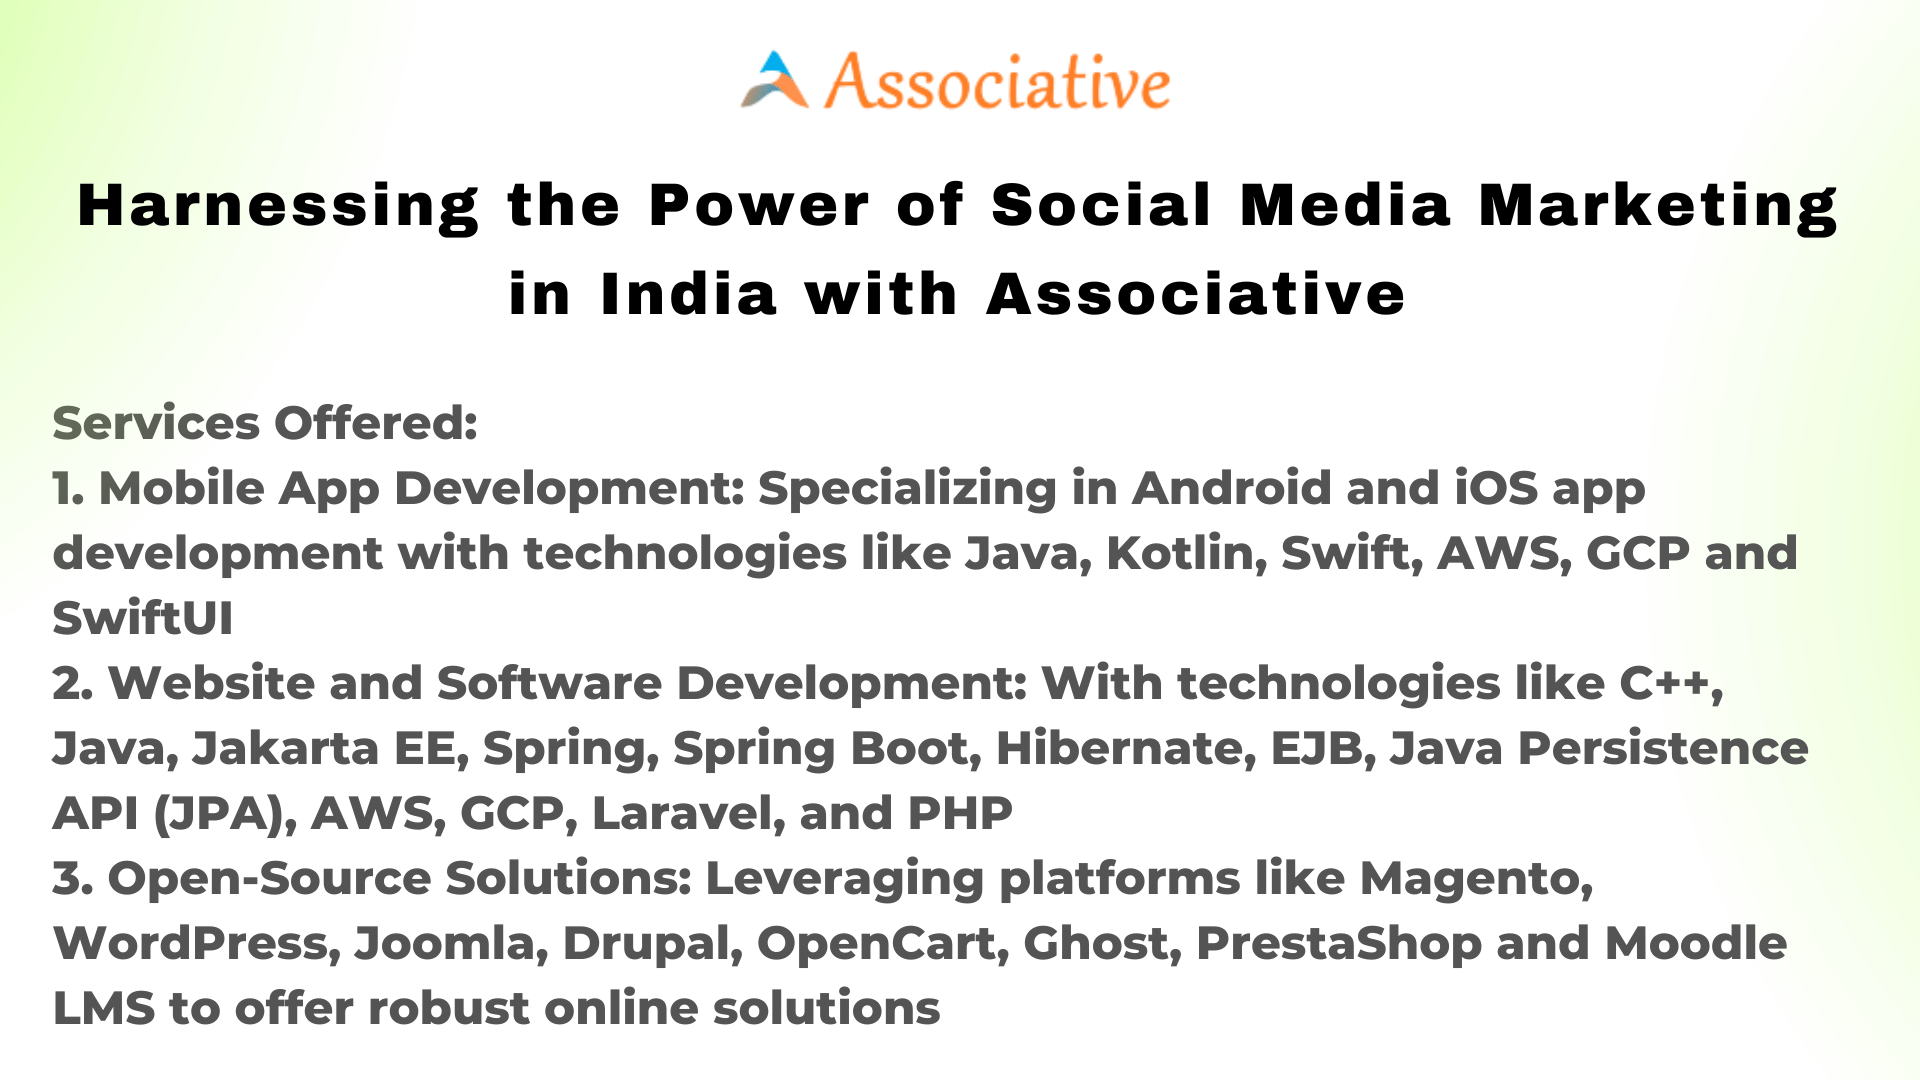 Harnessing the Power of Social Media Marketing in India with Associative